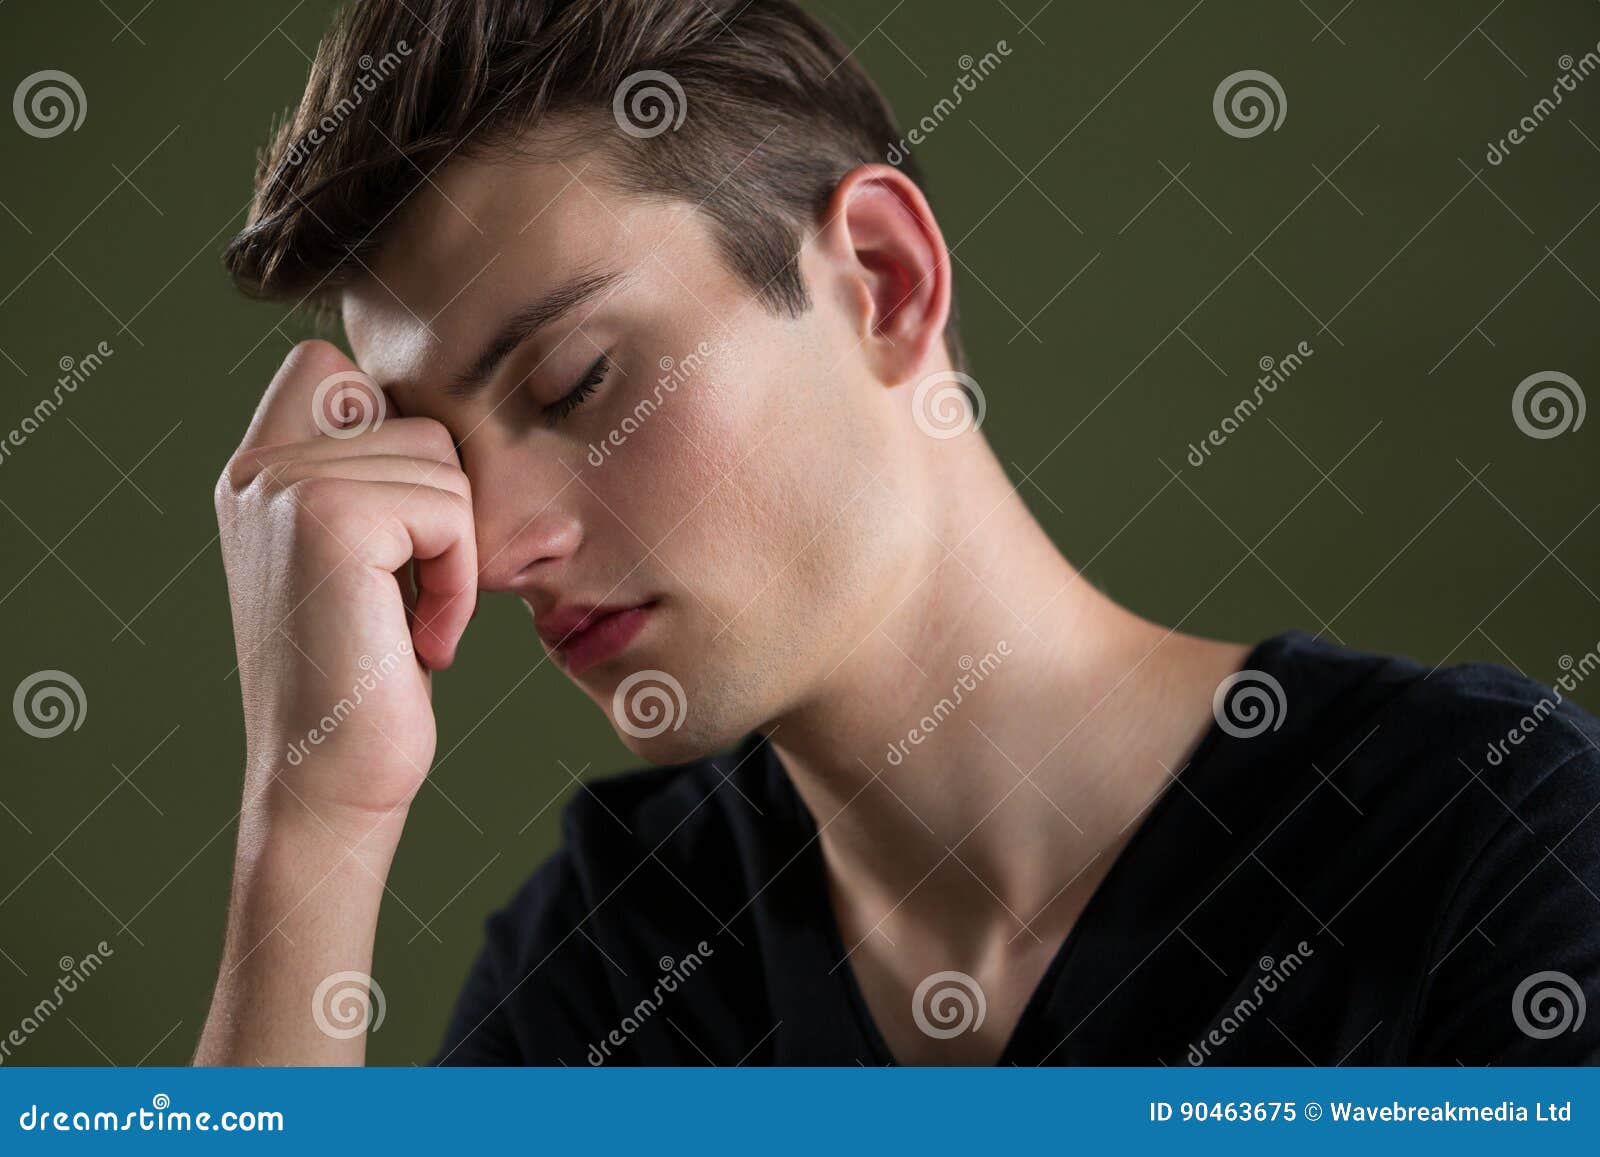 tense androgynous man with hand on forehead